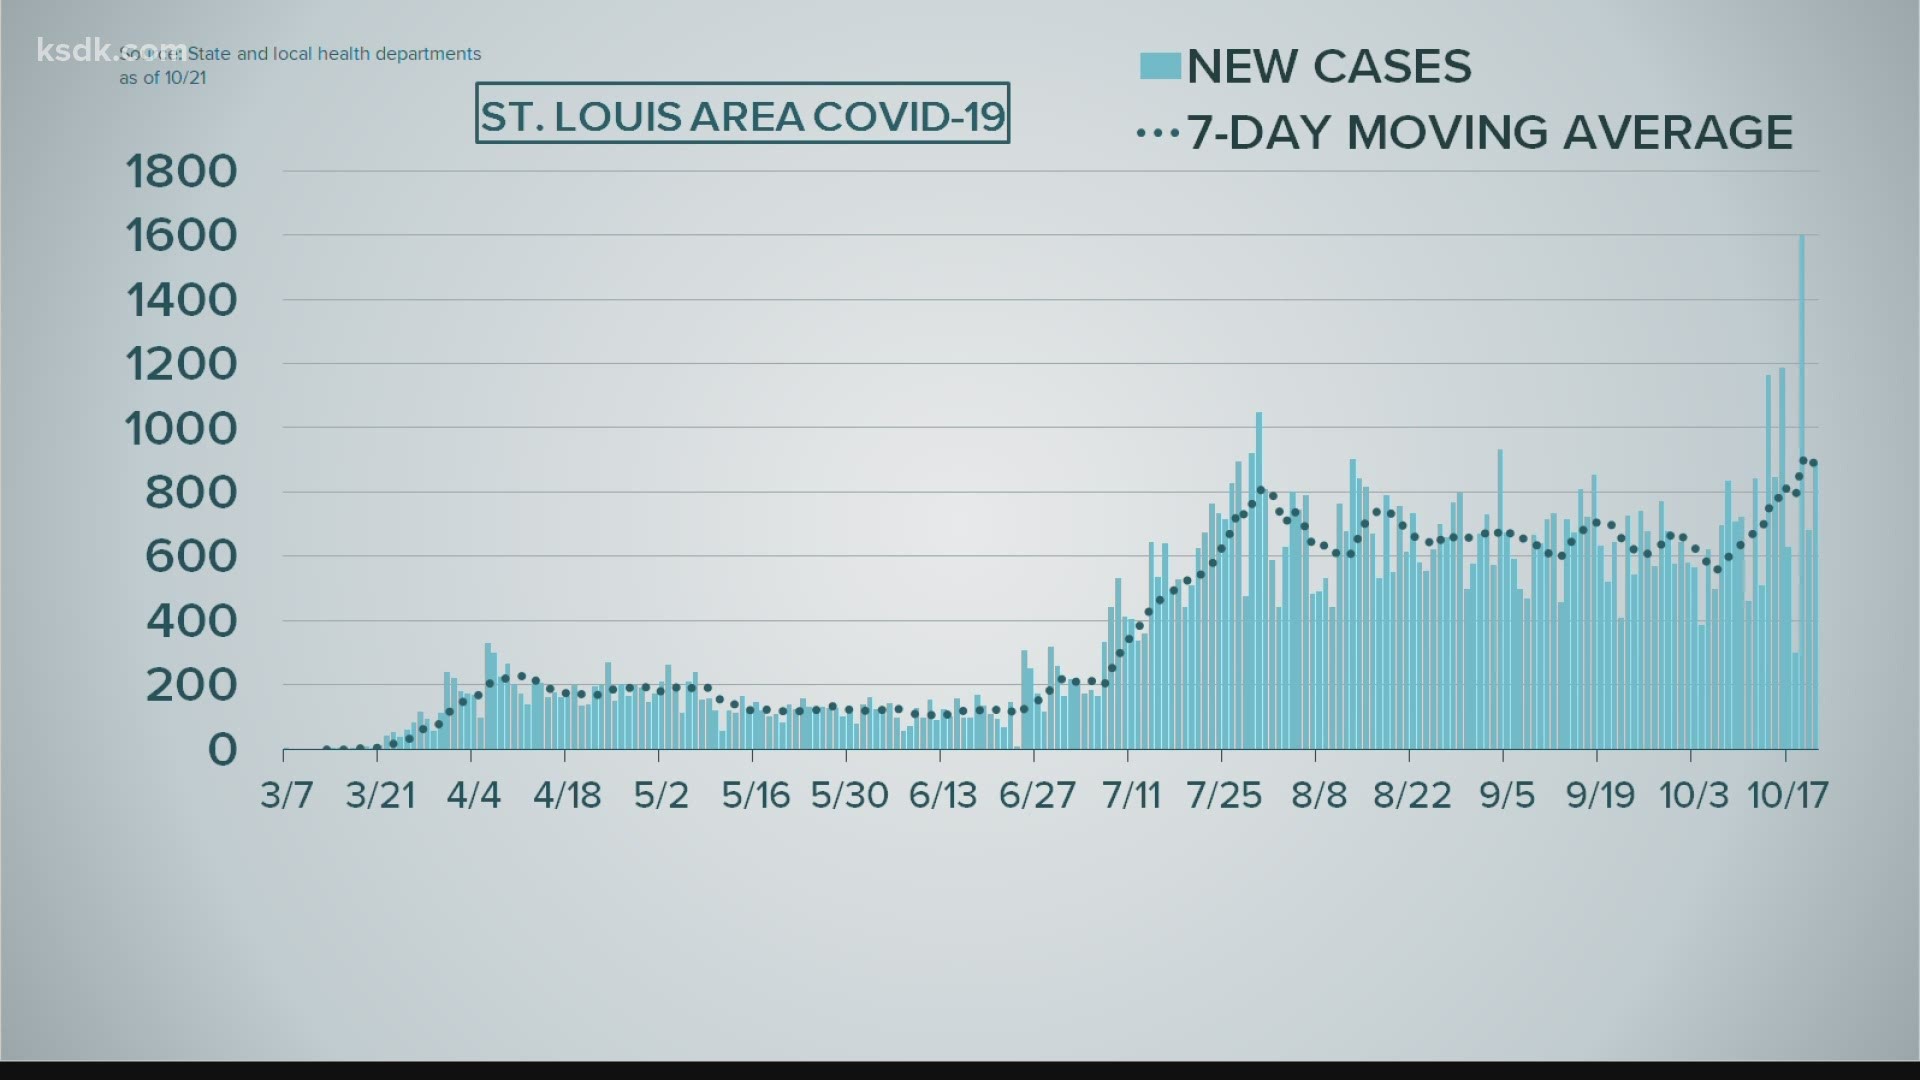 The St. Louis area reported 889 new cases yesterday